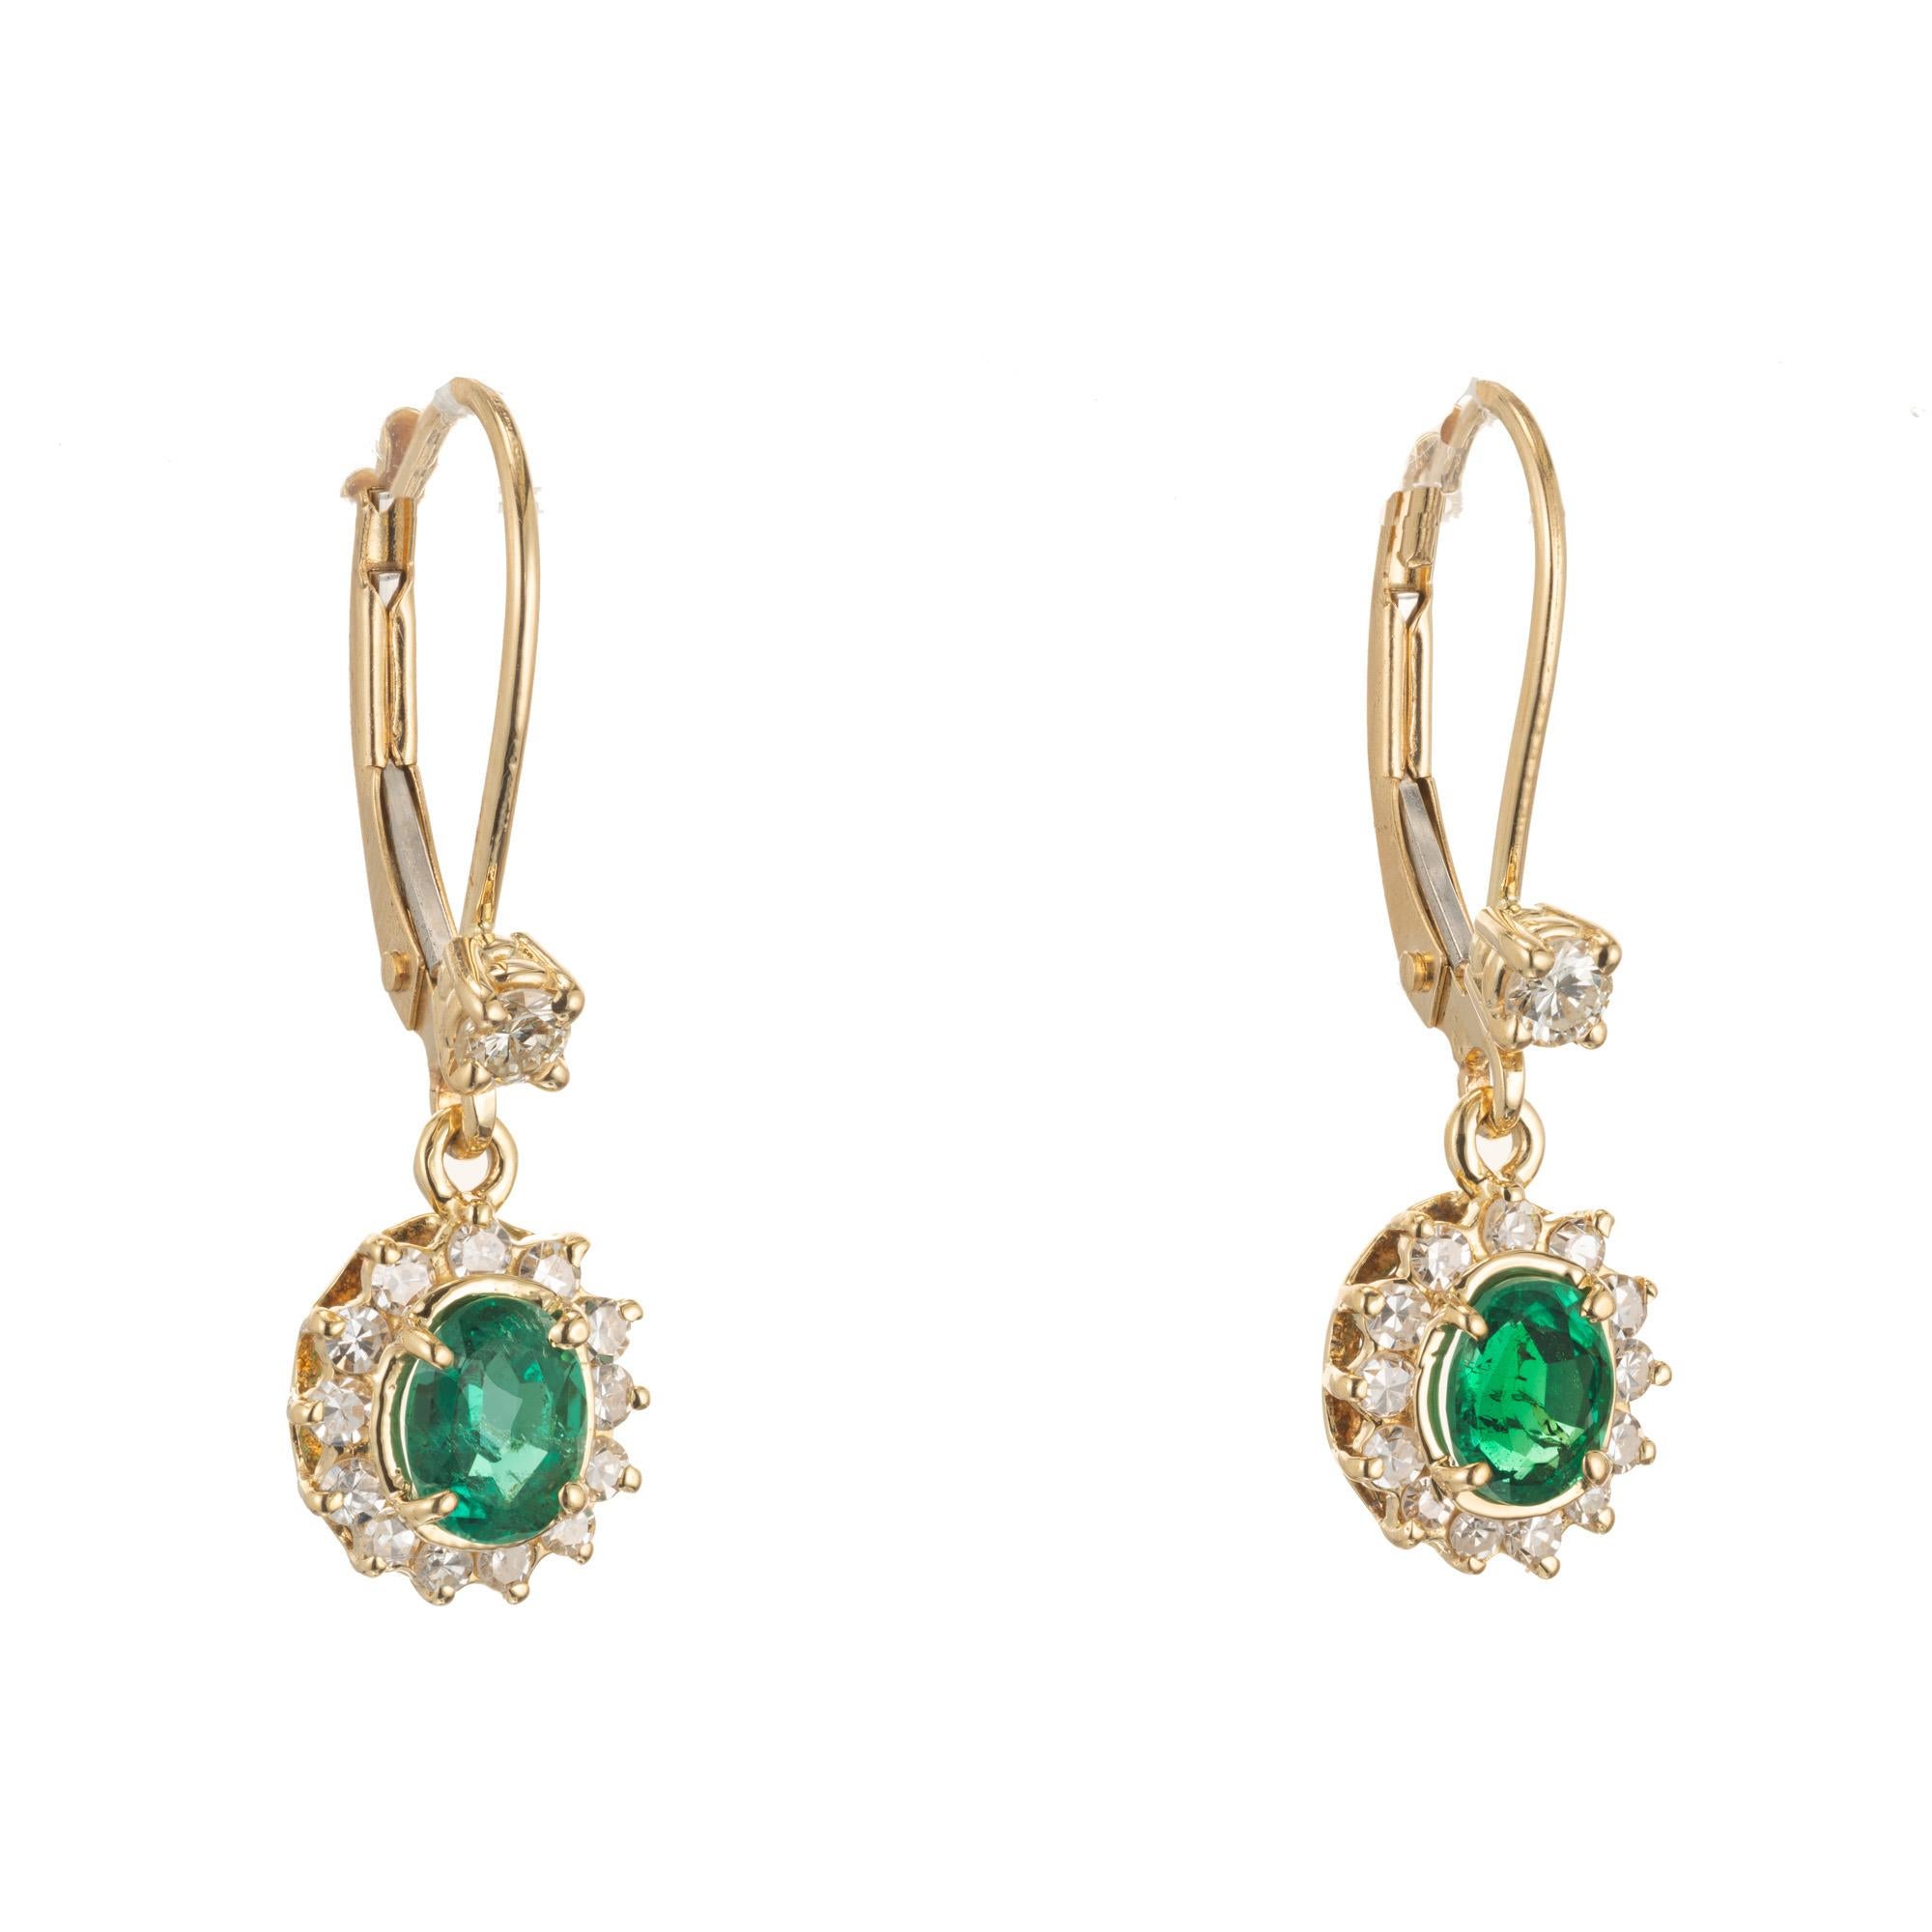 GIA certified oval natural emerald and diamond halo dangle earrings with two round accent diamonds in 14k yellow gold.

2 oval green emeralds, approx. .65cts GIA Certificate # 2201105343
26 single cut diamonds, approx. .32cts H-I VS-SI
2 round